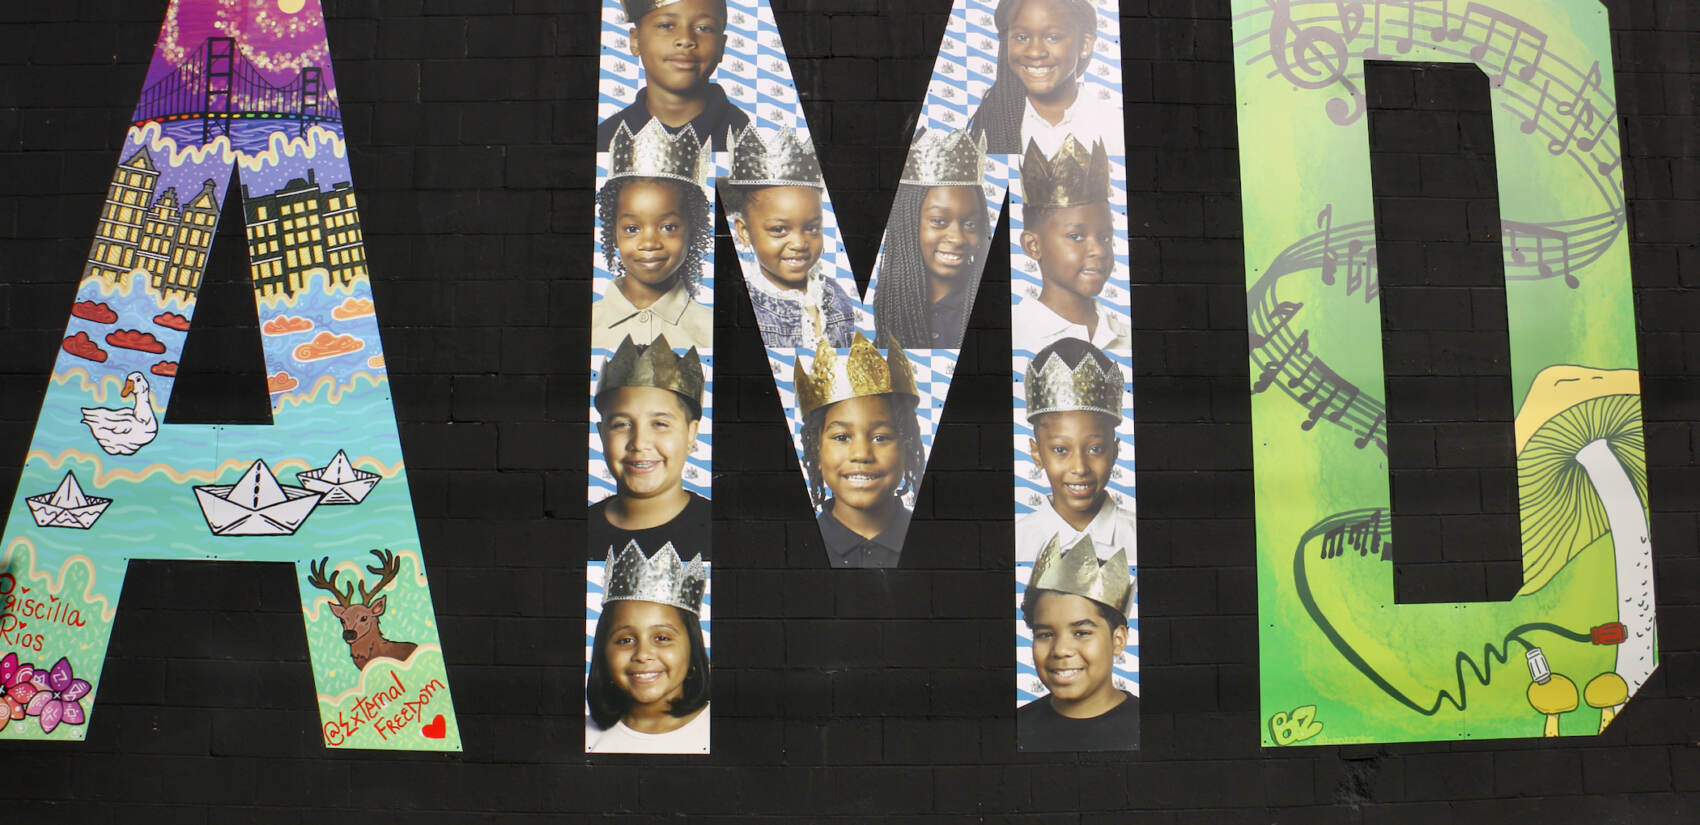 Erik James Montgomery, a fine art photographer, created the letter M using photographs of children’s faces. (Emma Lee/WHYY)